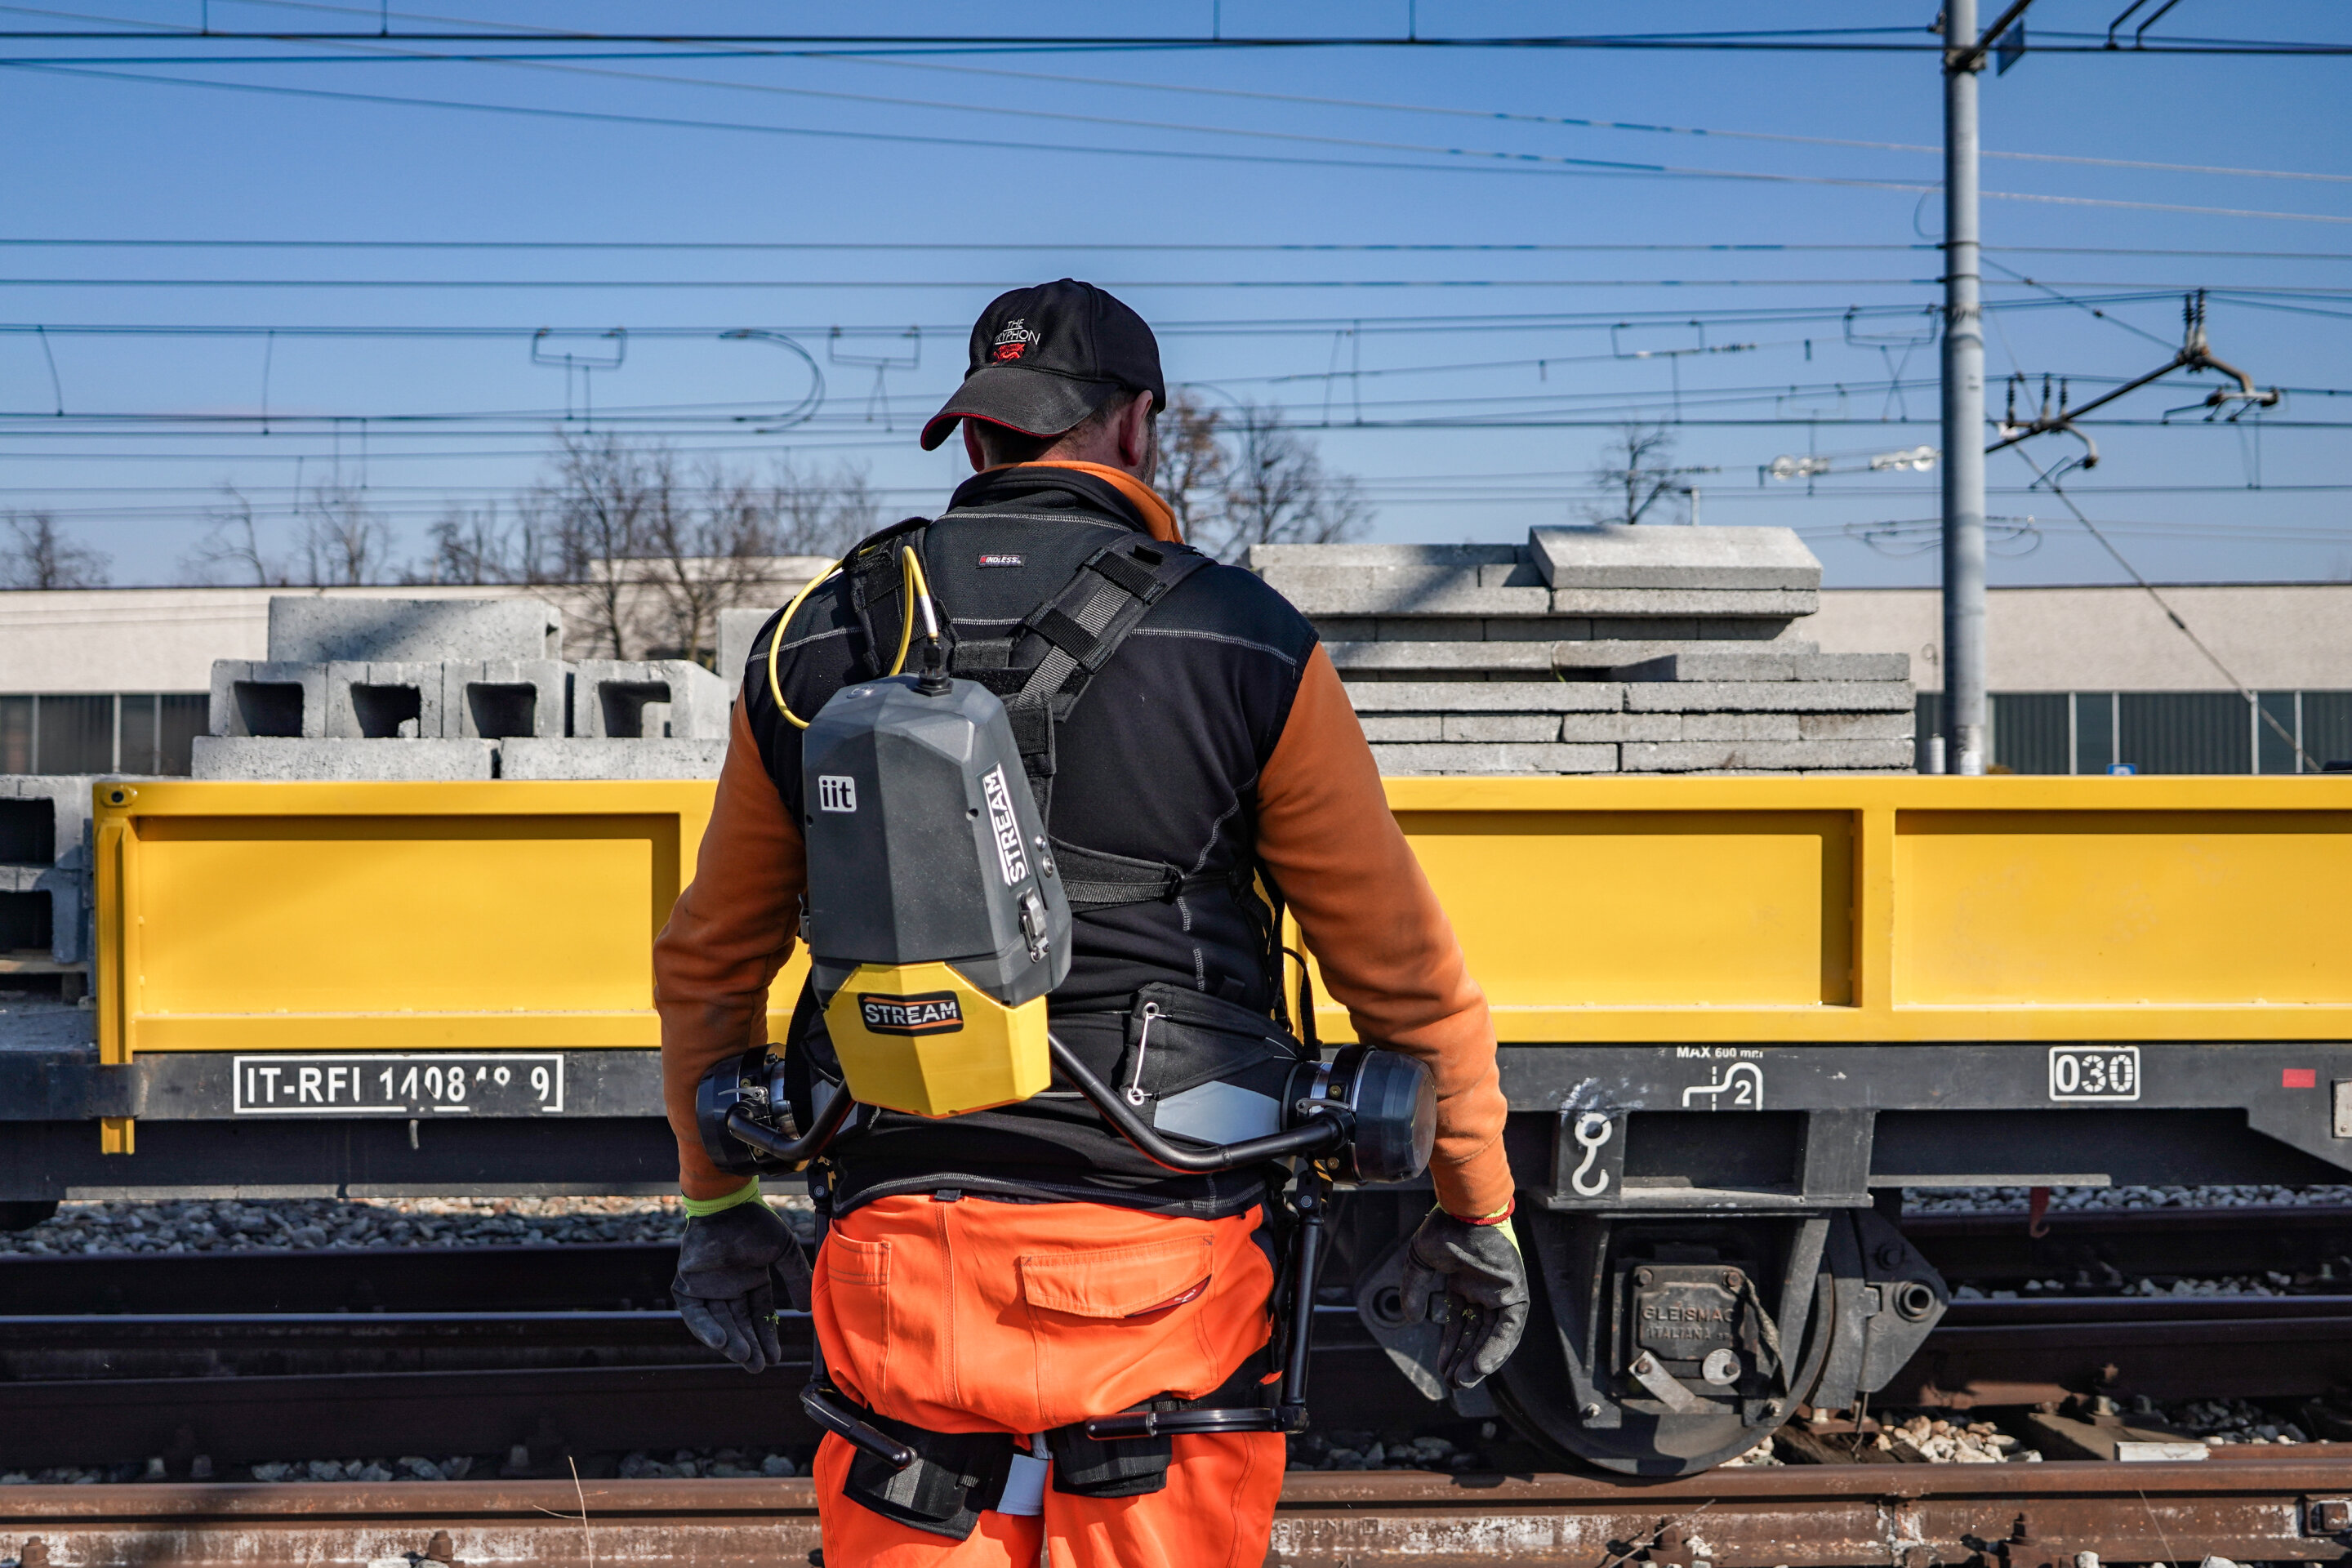 A new exoskeleton to support workers in railways maintenance and renewal operations